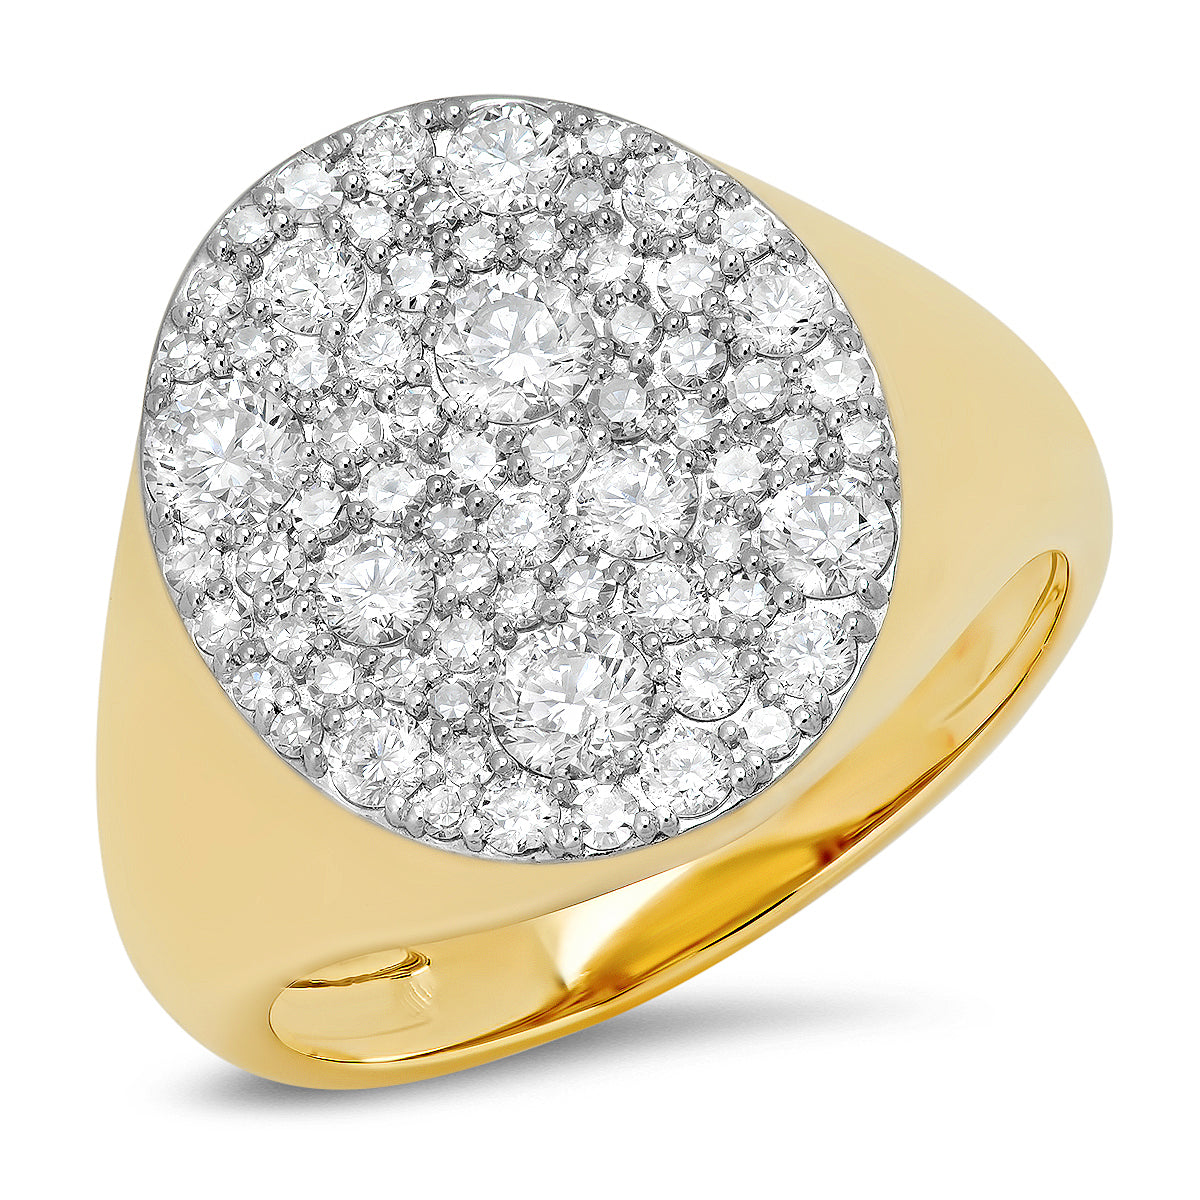 Pave Signet Pinky Cubic Zirconia Ring - Large